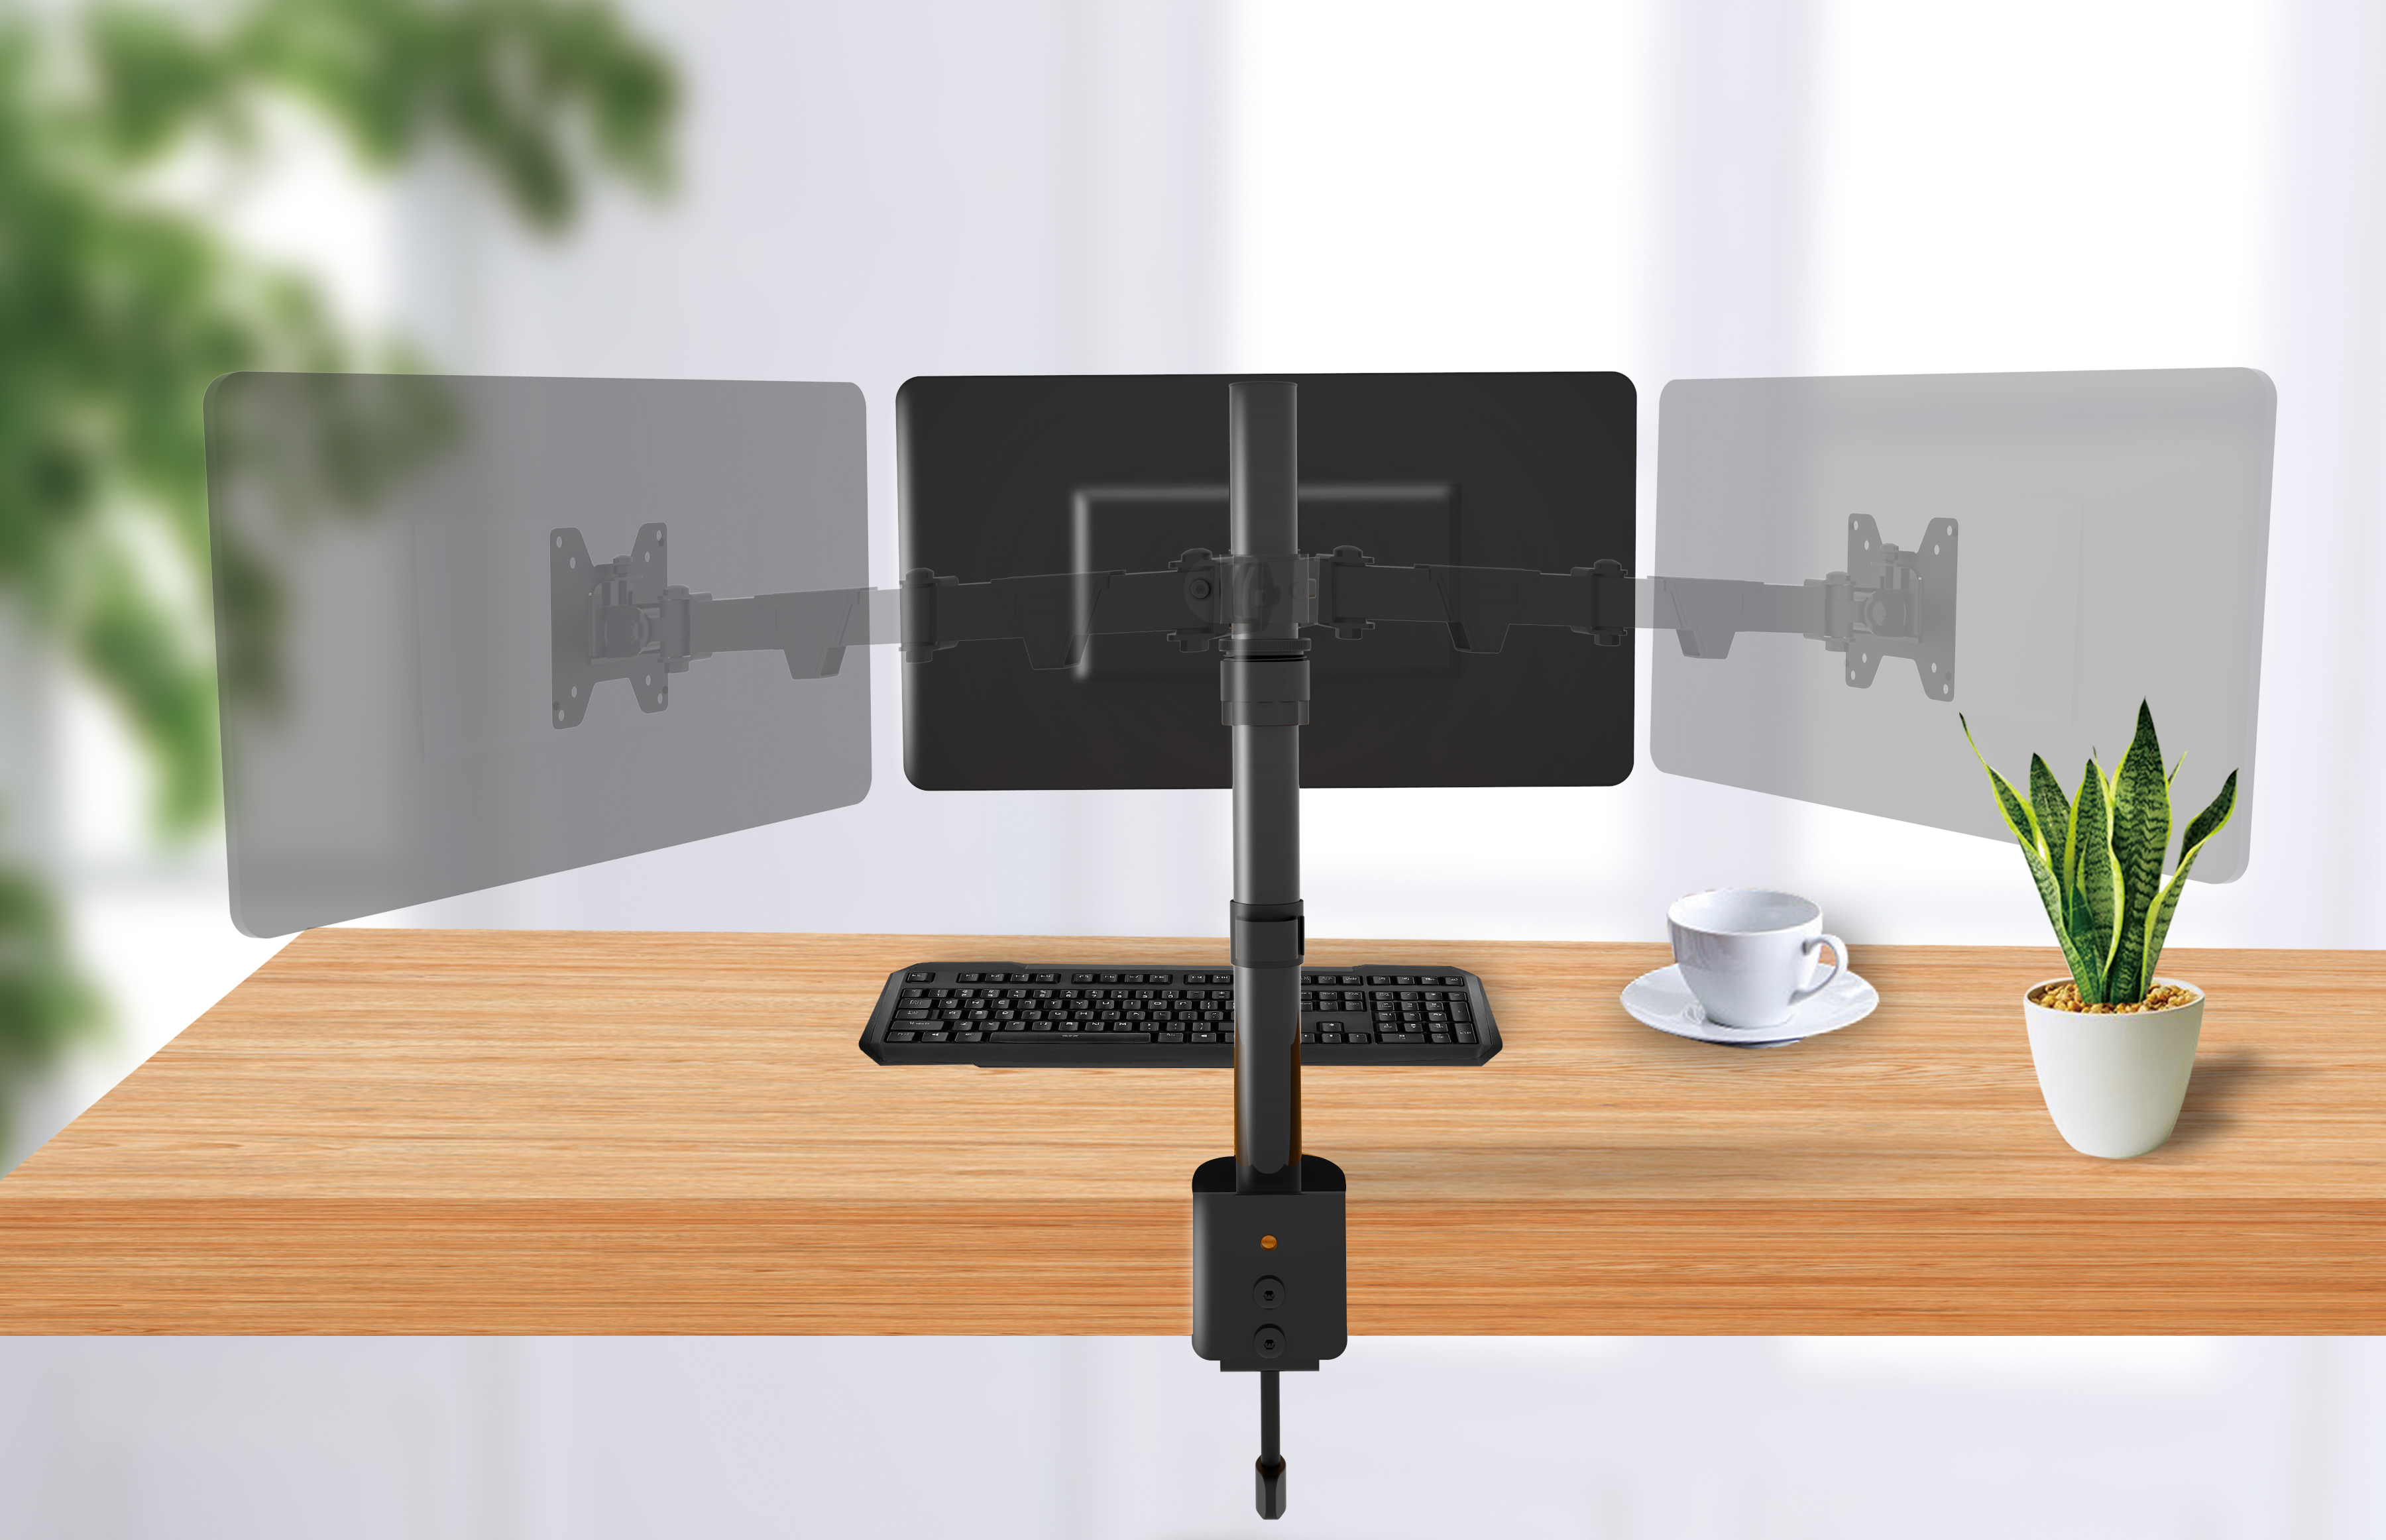 Simulated image of three monitors attached to Cepter monitor mount